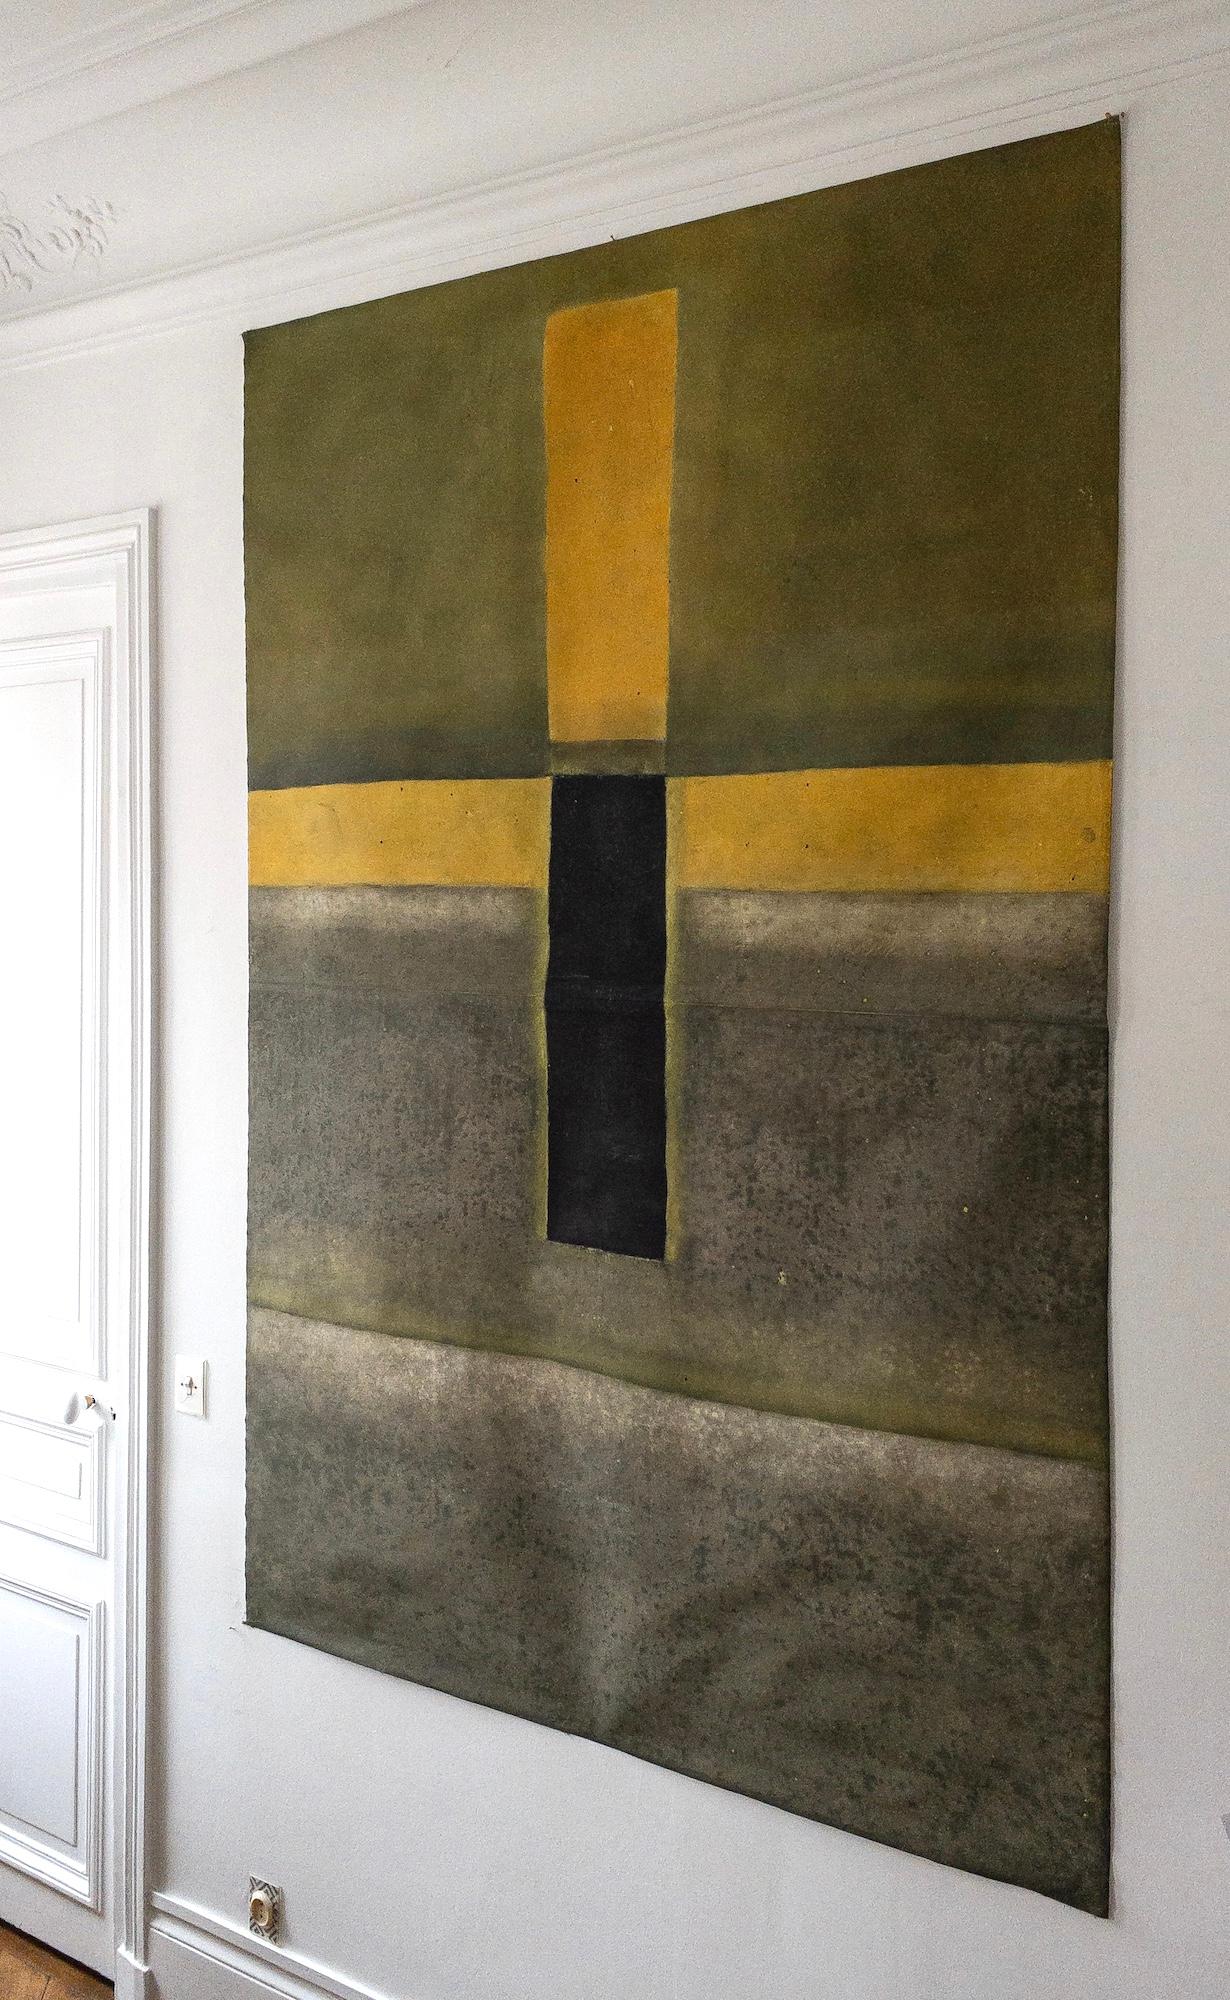 Untitled LXIX is a unique oil on free-standing canvas painting by contemporary artist Ferle, dimensions are 200 cm × 140 cm (78.7 × 55.1 in).
The artwork is signed, sold unframed and comes with a certificate of authenticity.

A viewer would first